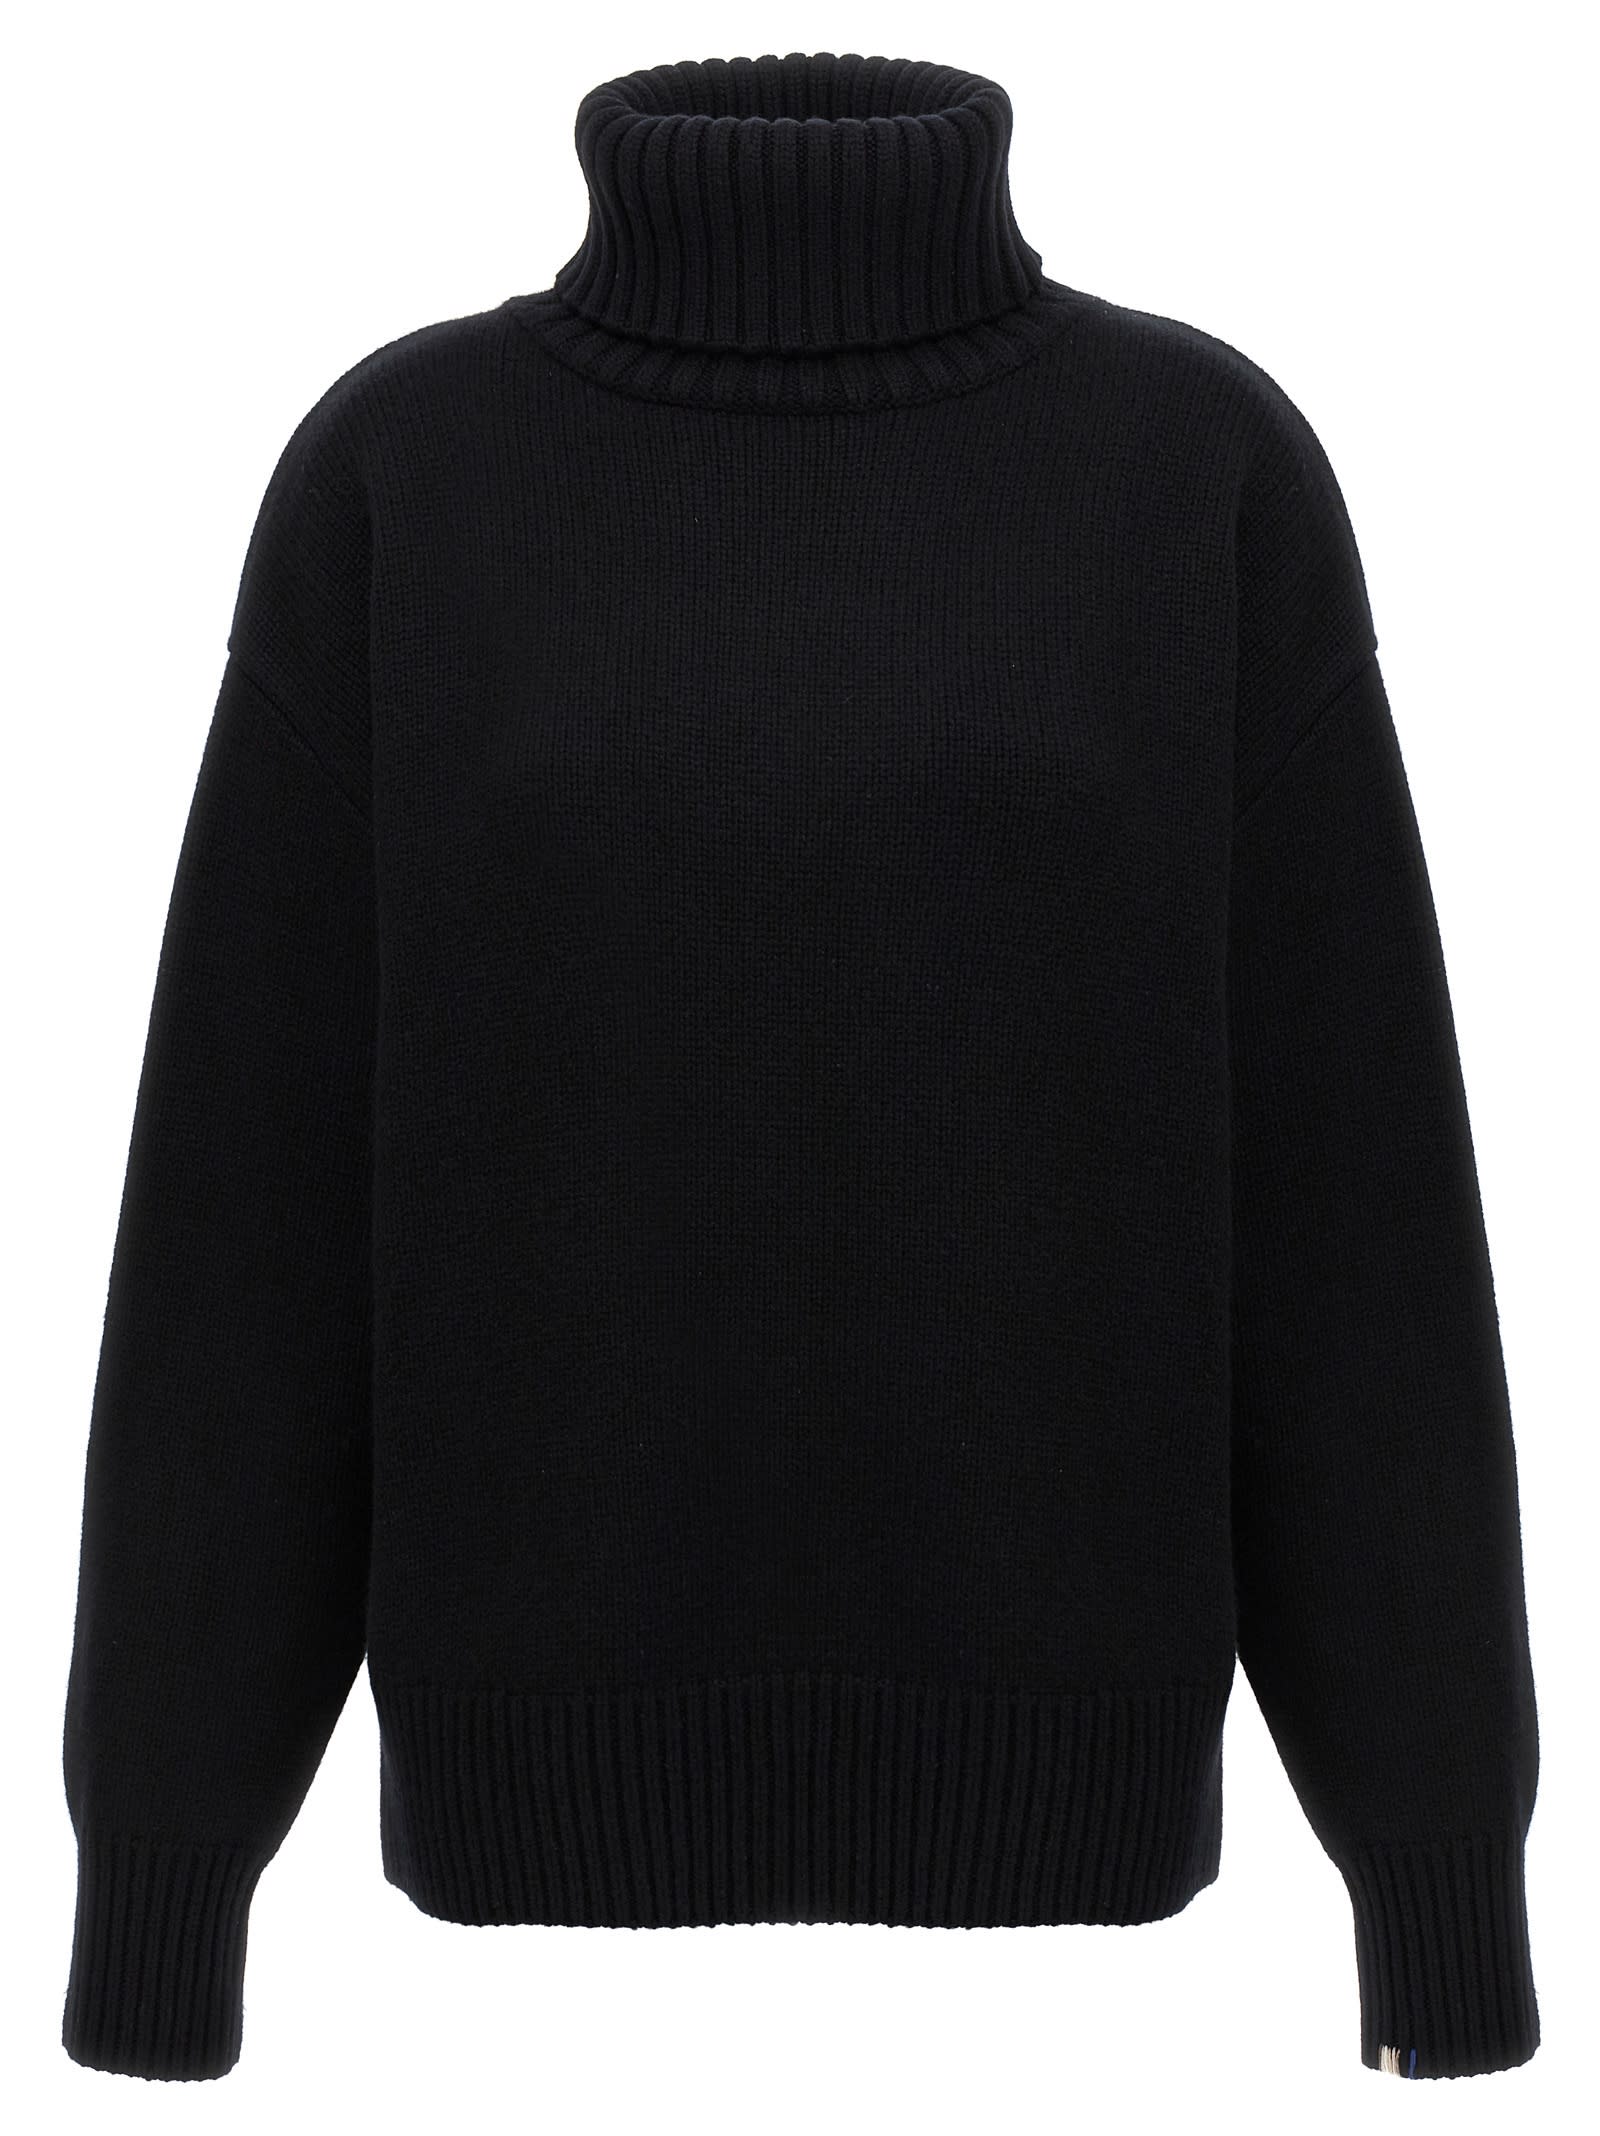 n°20 Oversize Xtra Sweater